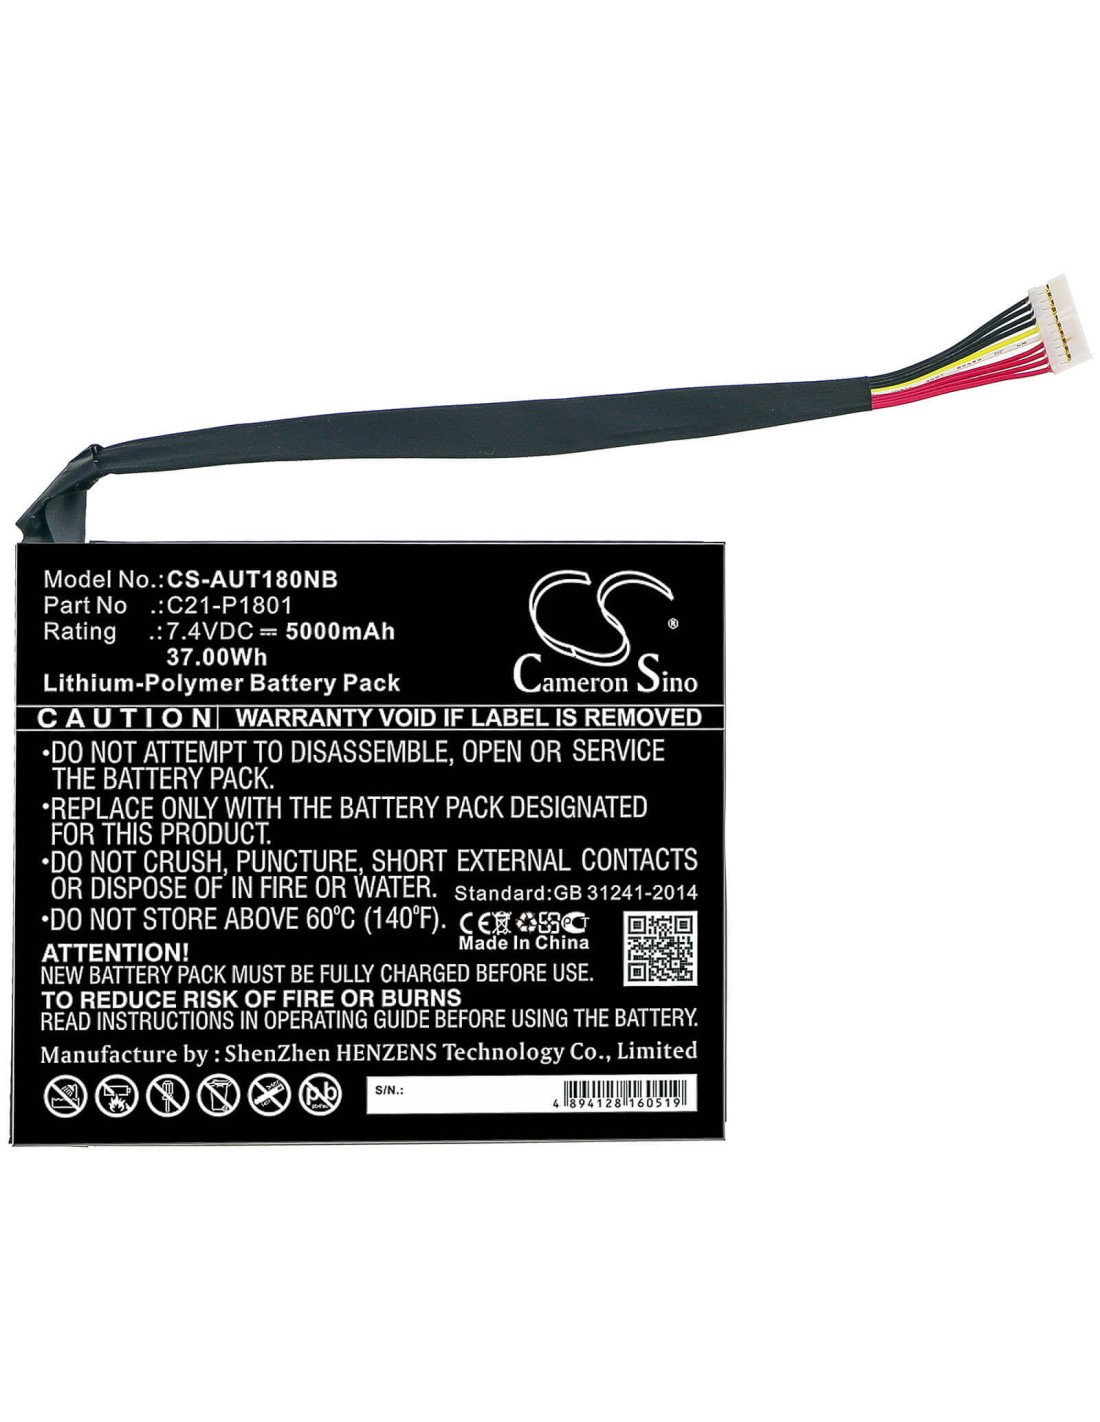 Battery for Asus, Ap180c, P18y23, Transformer Aio P1801 7.4V, 5000mAh - 37.00Wh